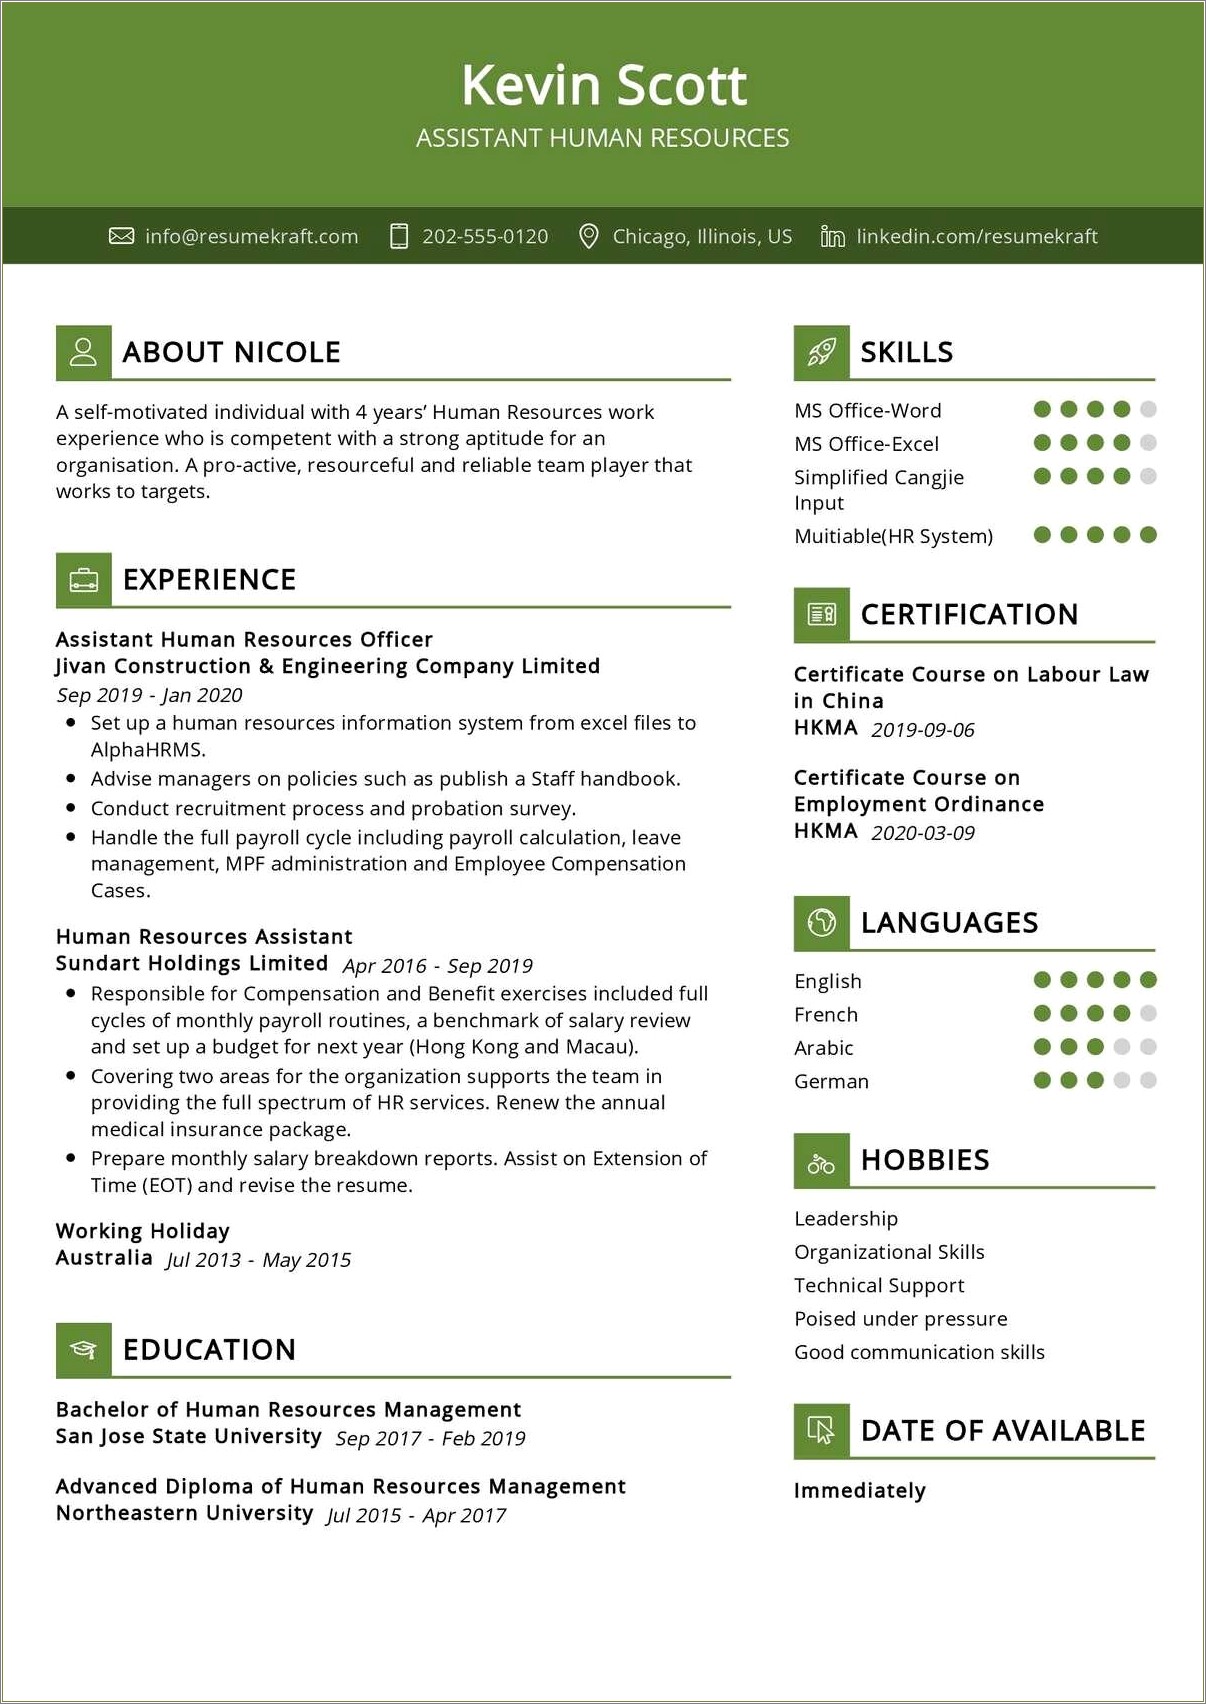 Administrative Assistant Human Resources Sample Resume